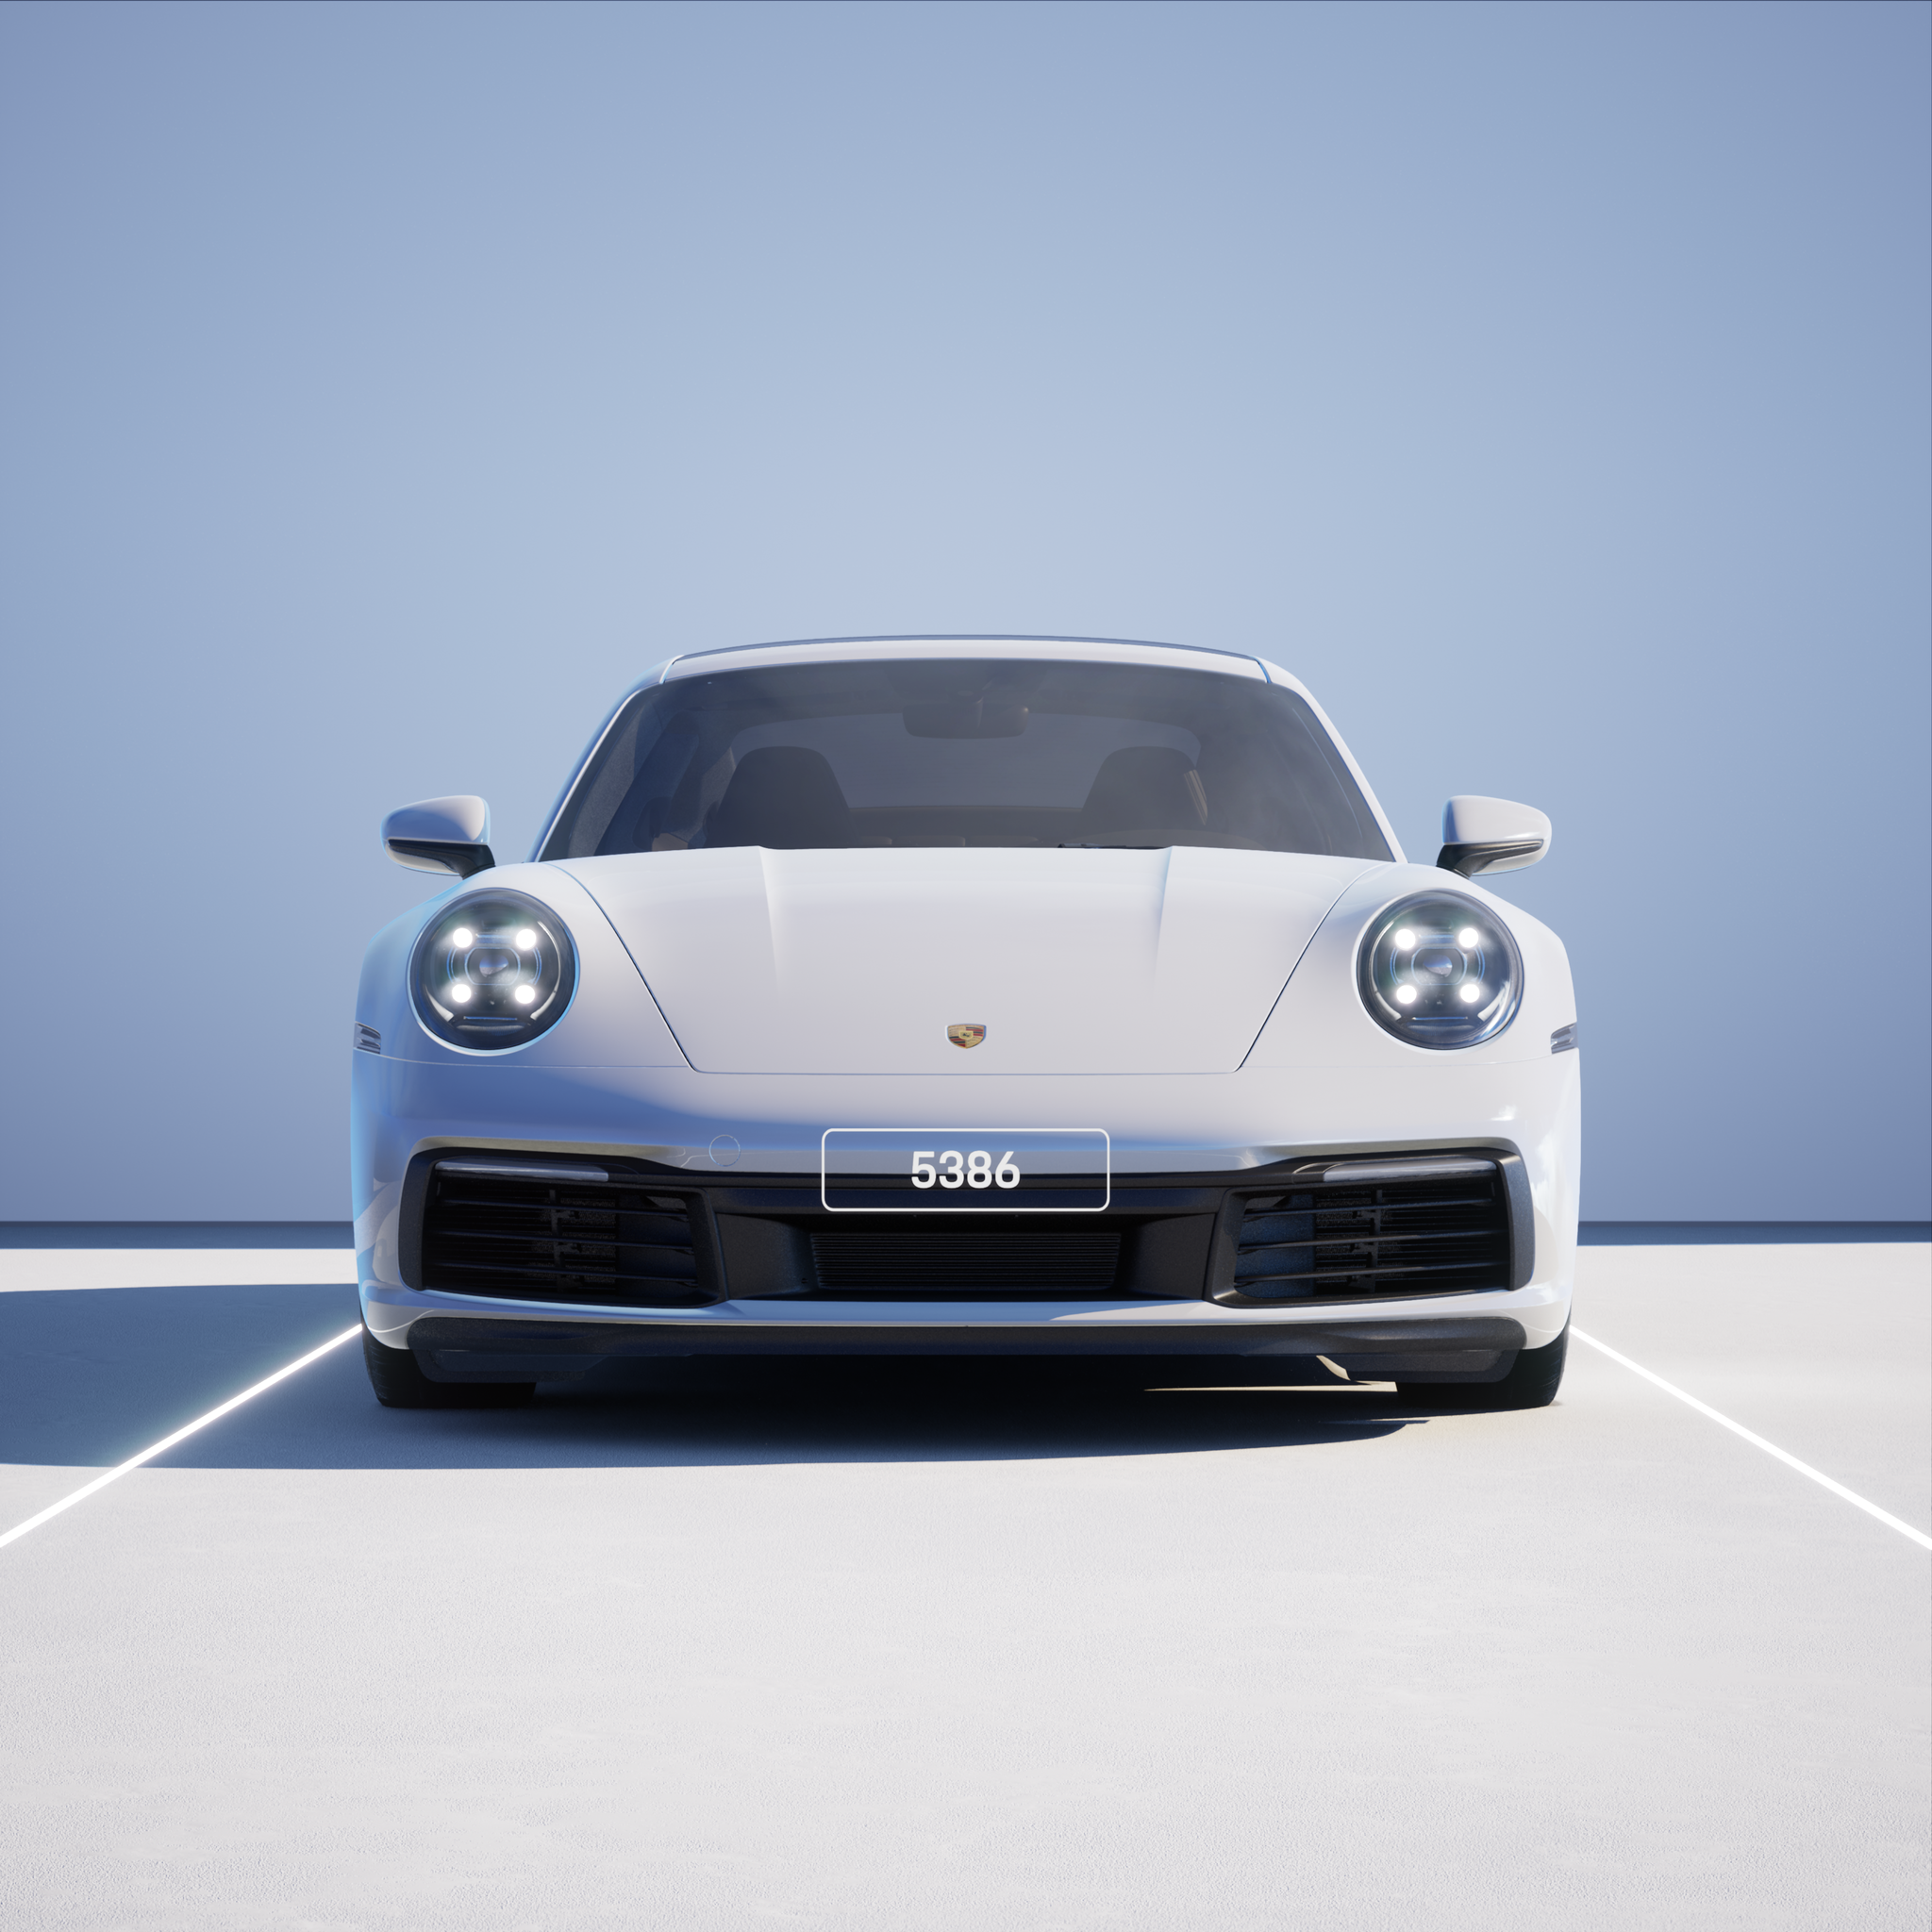 The PORSCHΞ 911 5386 image in phase